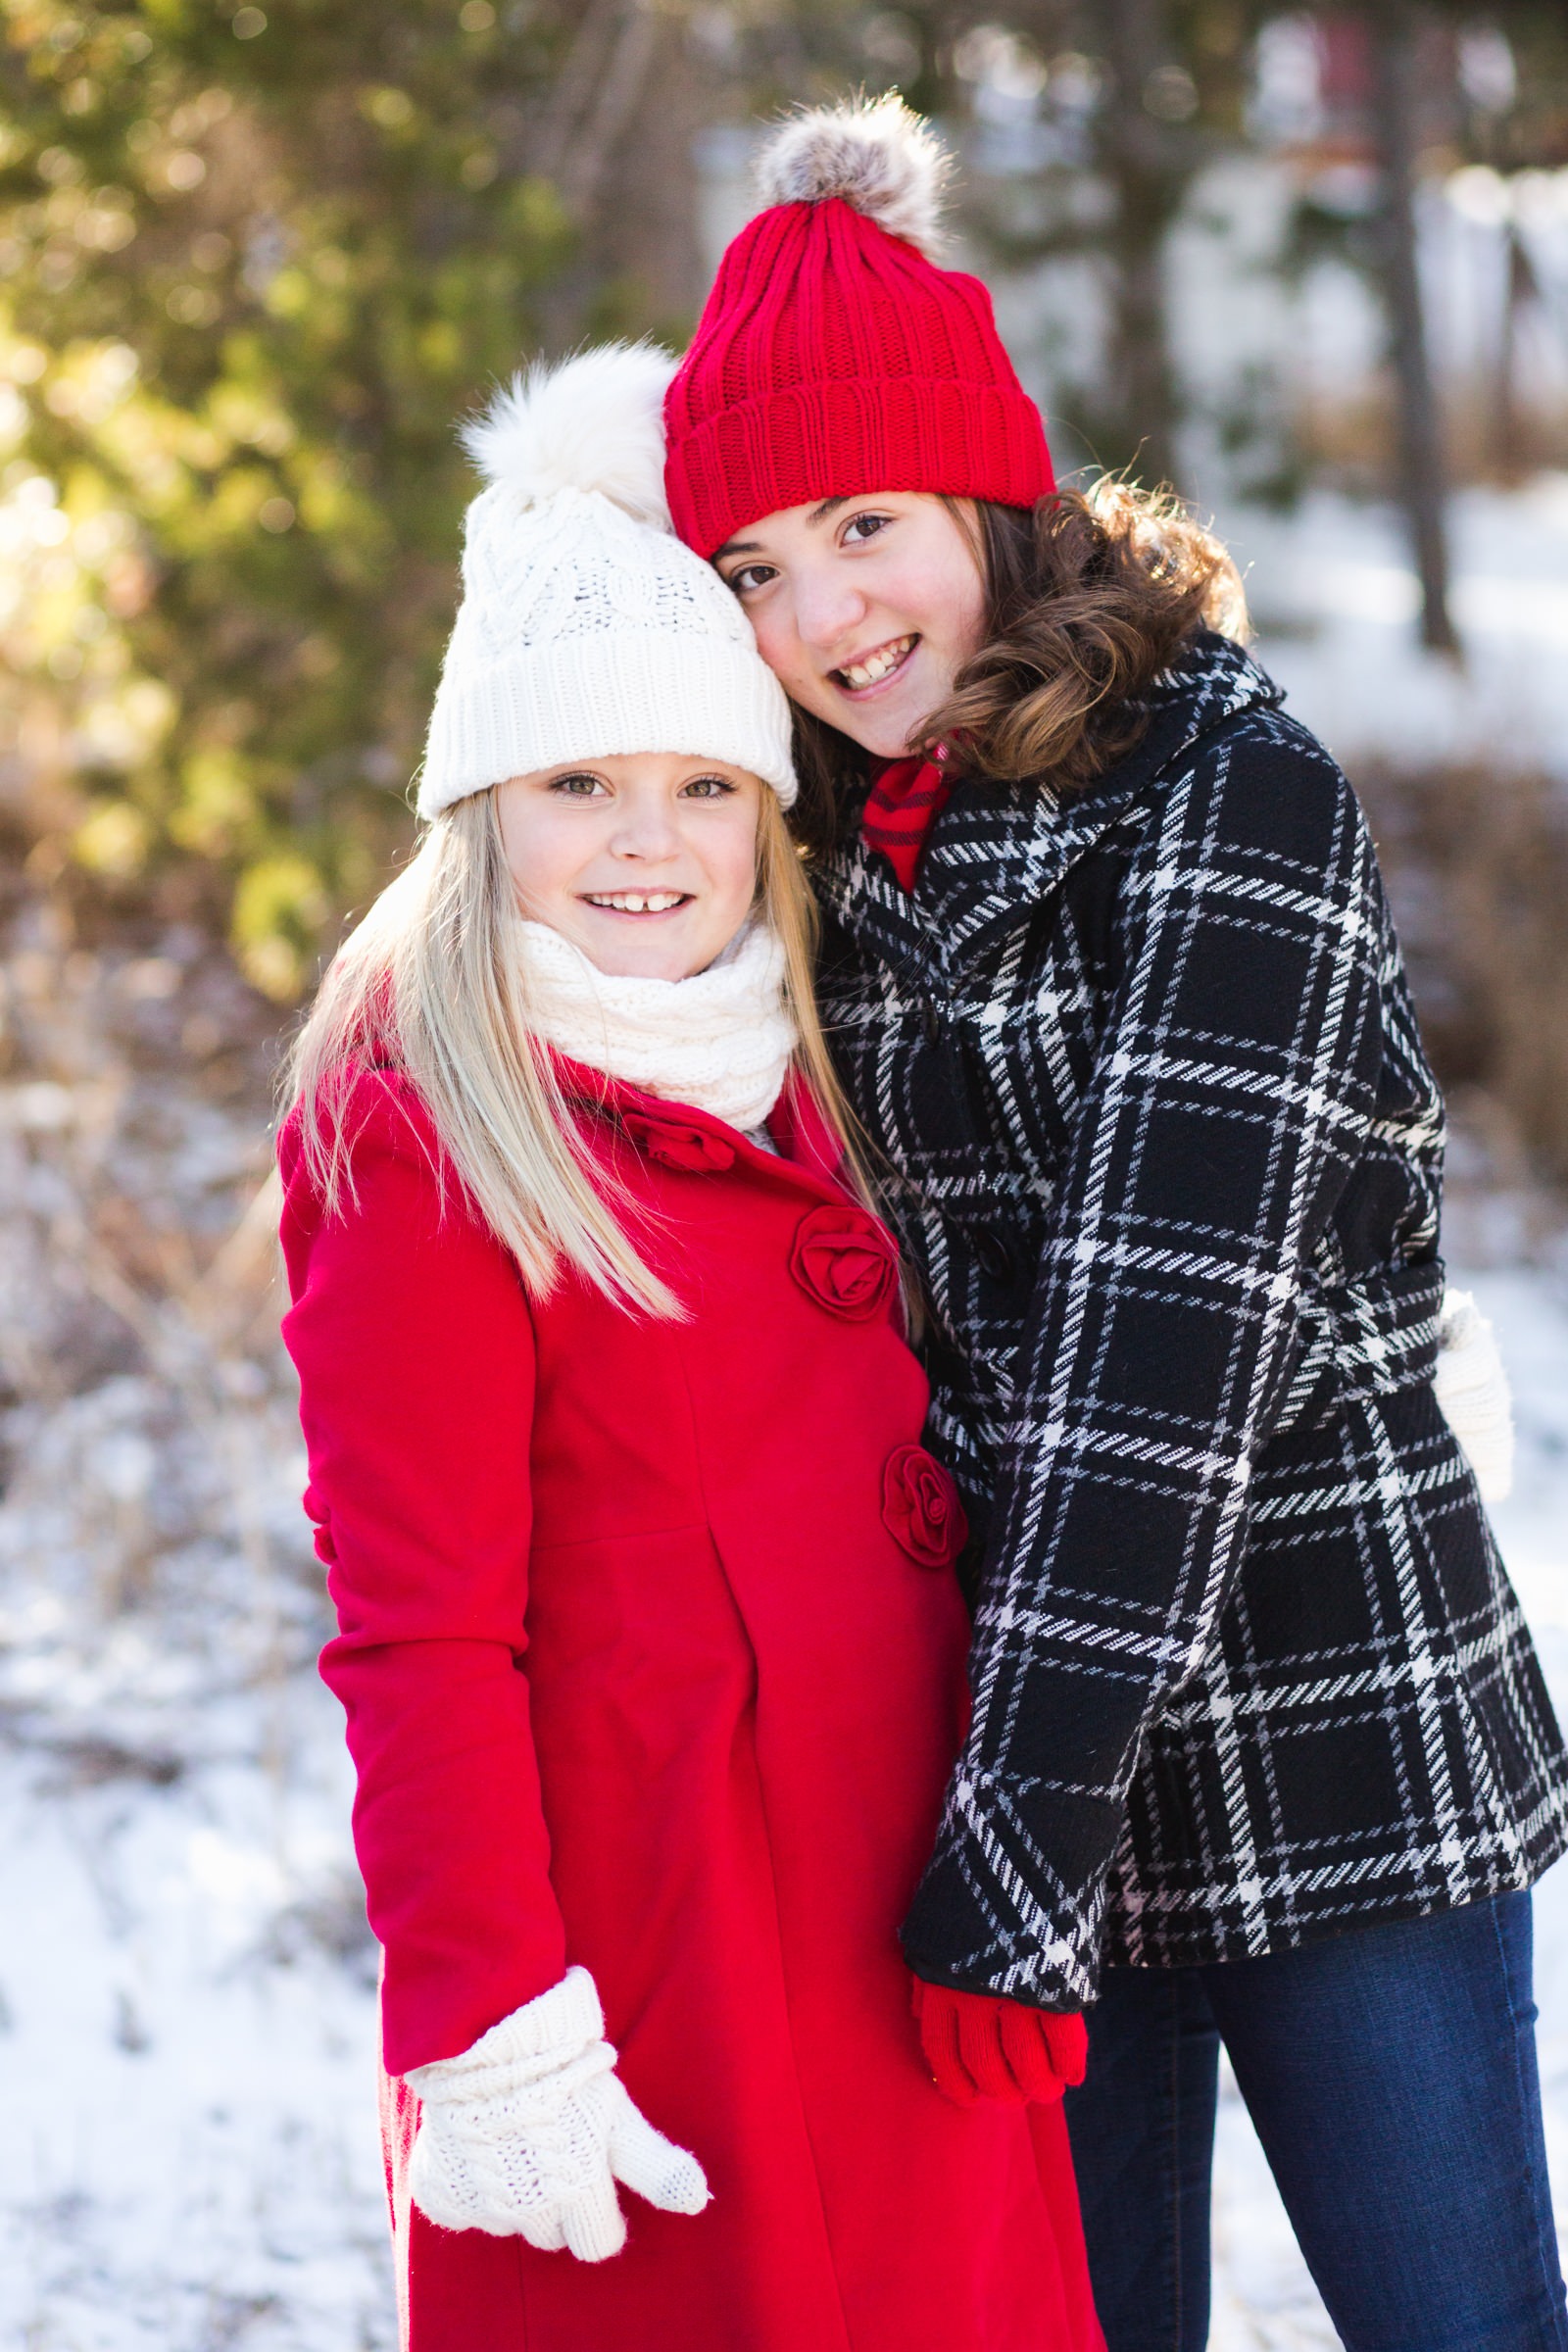 two sisters in bright winter outfits pose for the camera